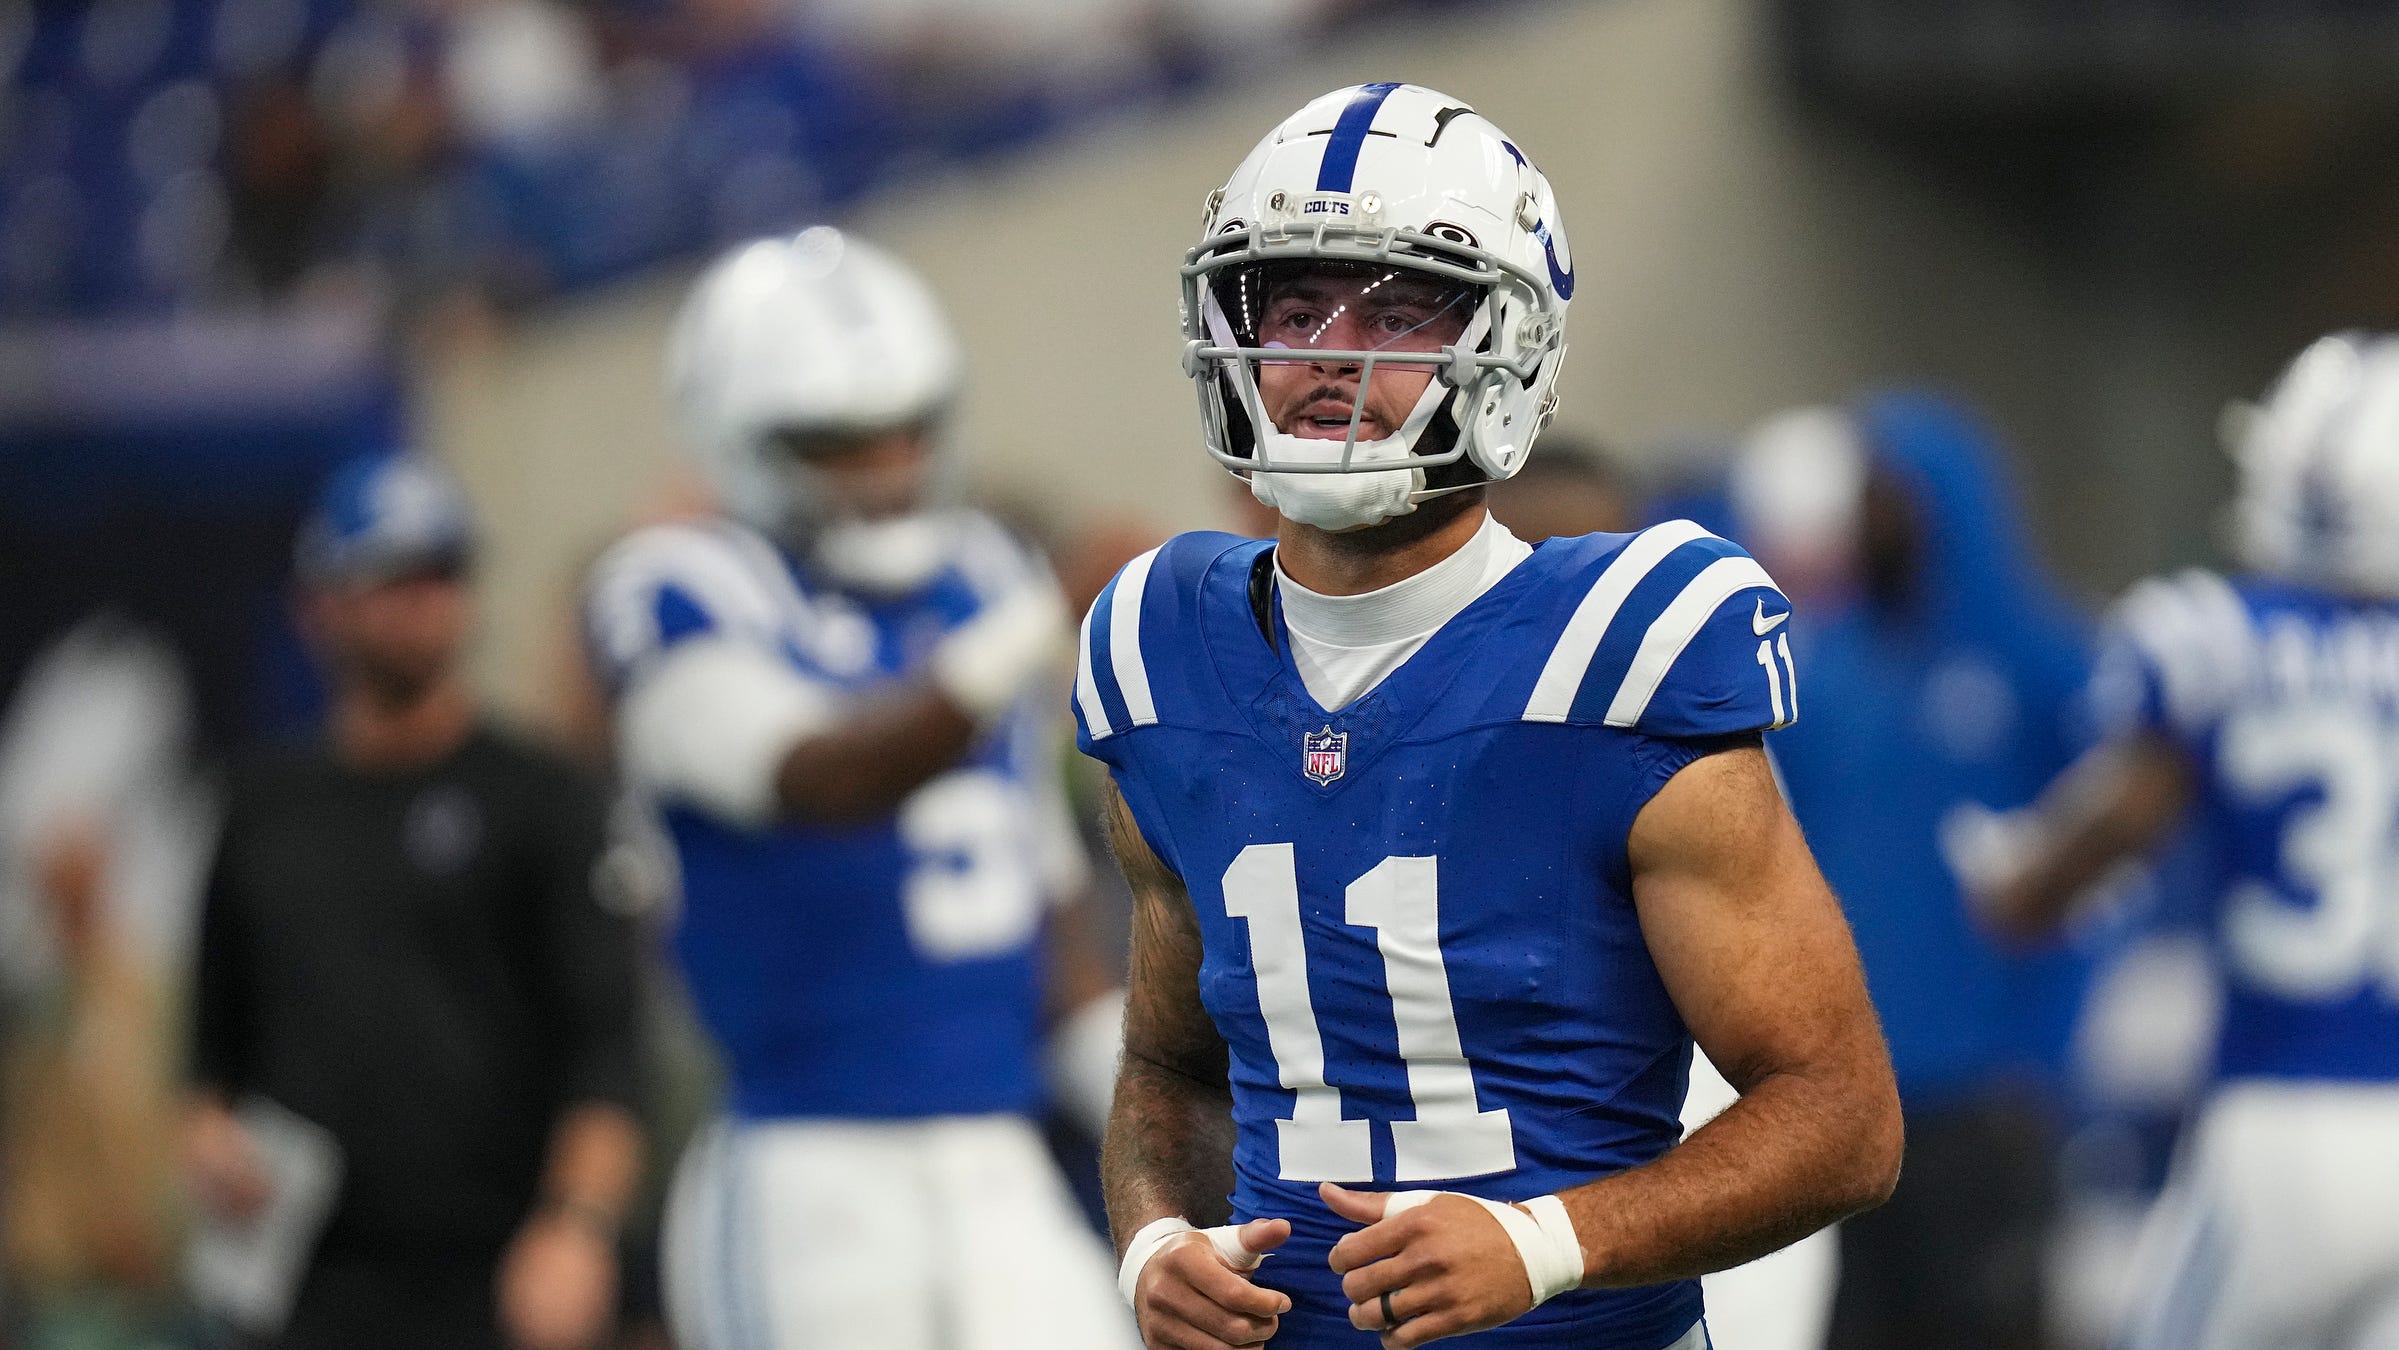 Problems on the farm, Colts' WR Pittman is losing chickens